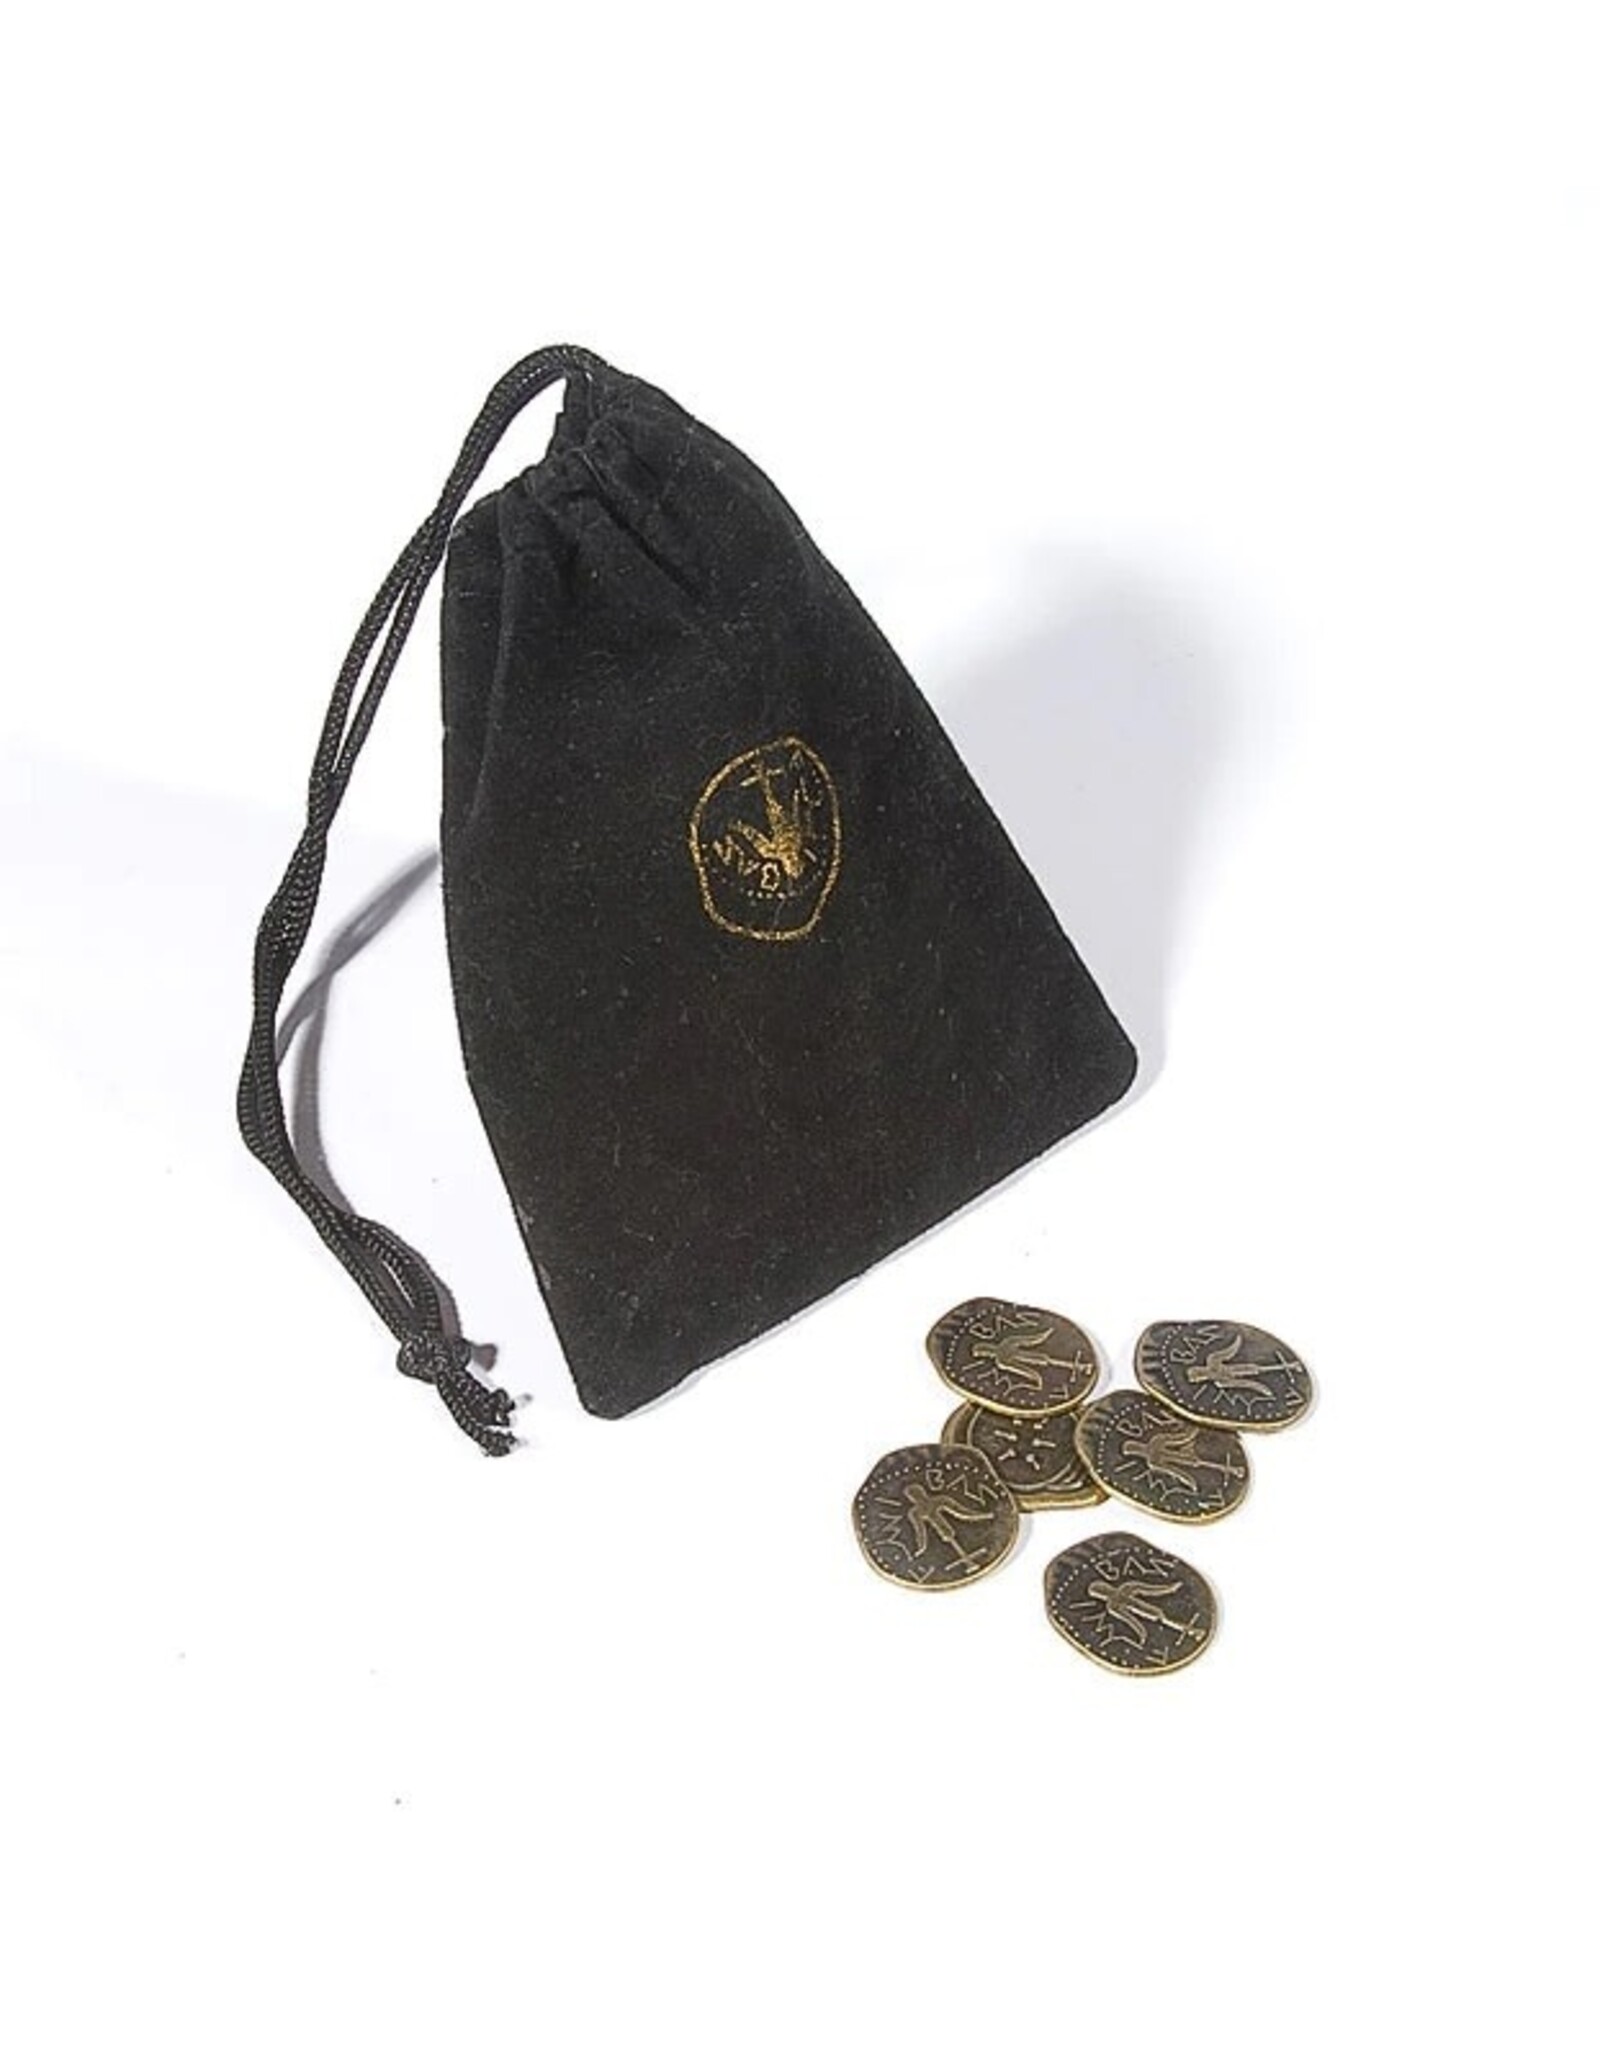 Holy Land Gifts Widow's Mite Coins w/ Velvet Bag - 10 coins and card